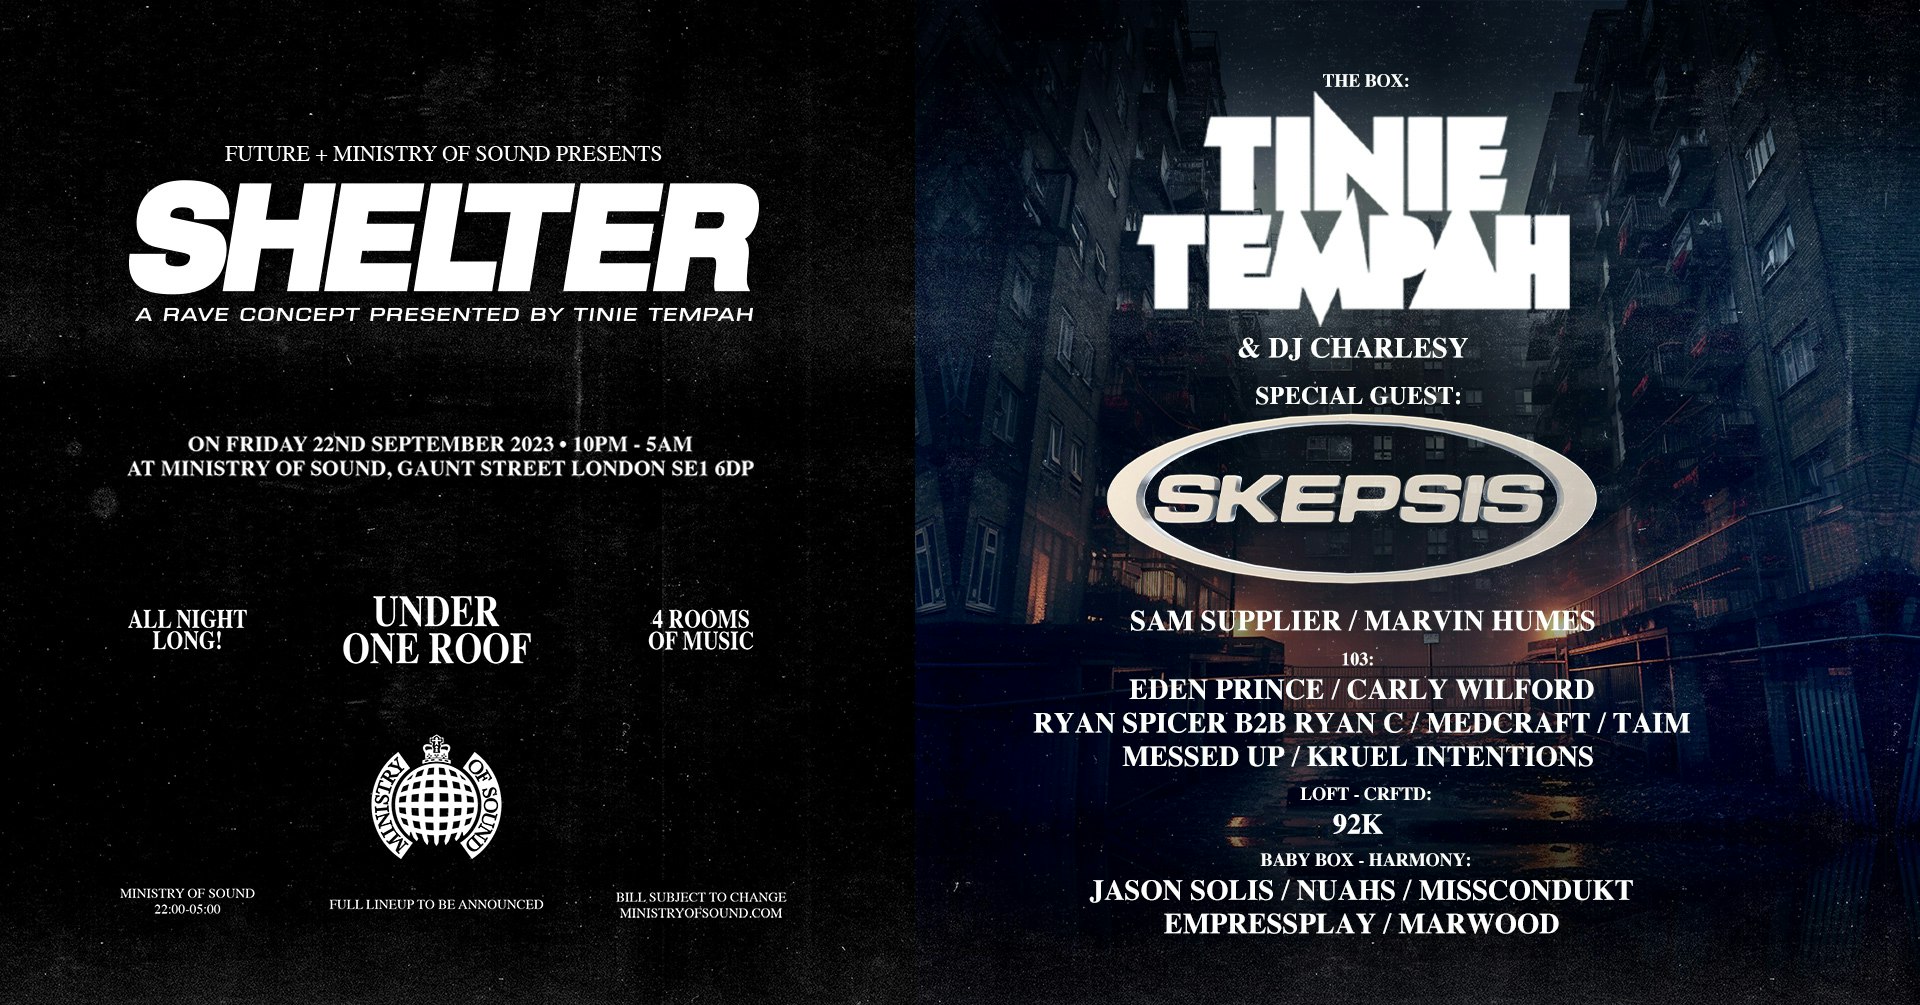 Ministry of Sound Presents: TINIE TEMPAH + SKEPSIS + MORE 🎧 – £10 TICKETS OUT NOW!